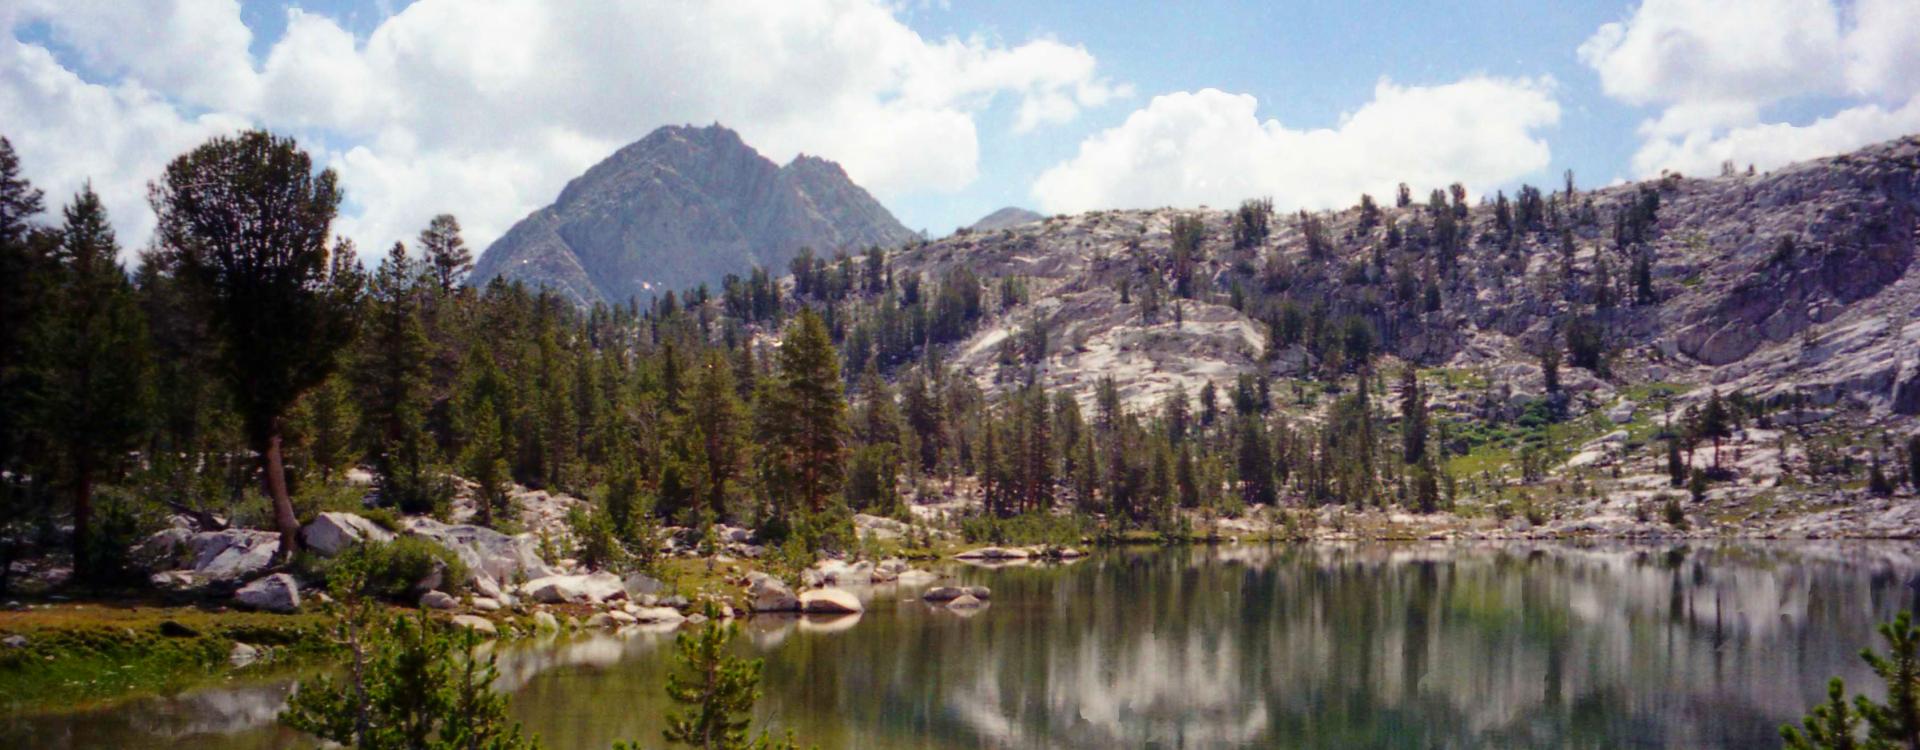 View of lake and mountains of south of Evolution Valley in Kings Canyon National Park